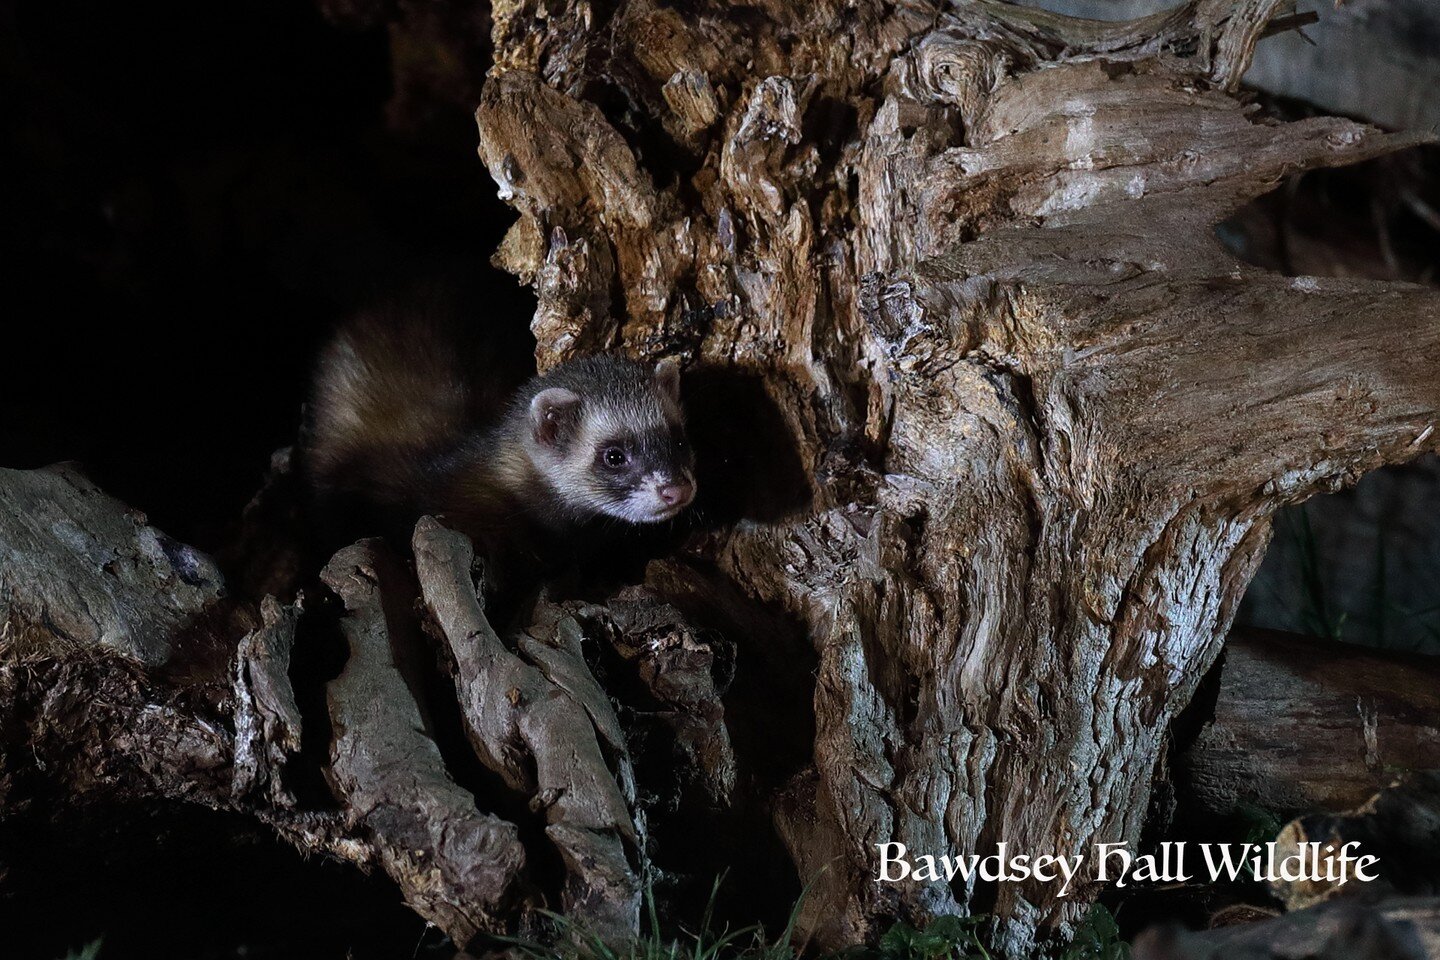 Don&rsquo;t miss your chance to photograph the rare Polecat and kits Bawdsey Hall Wildlife Photography Hides ! Multiple visiting currently alongside badgers and cubs too!!!!

Spaces available this week:
Monday 5th Sep 
Wed 7th Sep 
Sat 10th Sep

Next